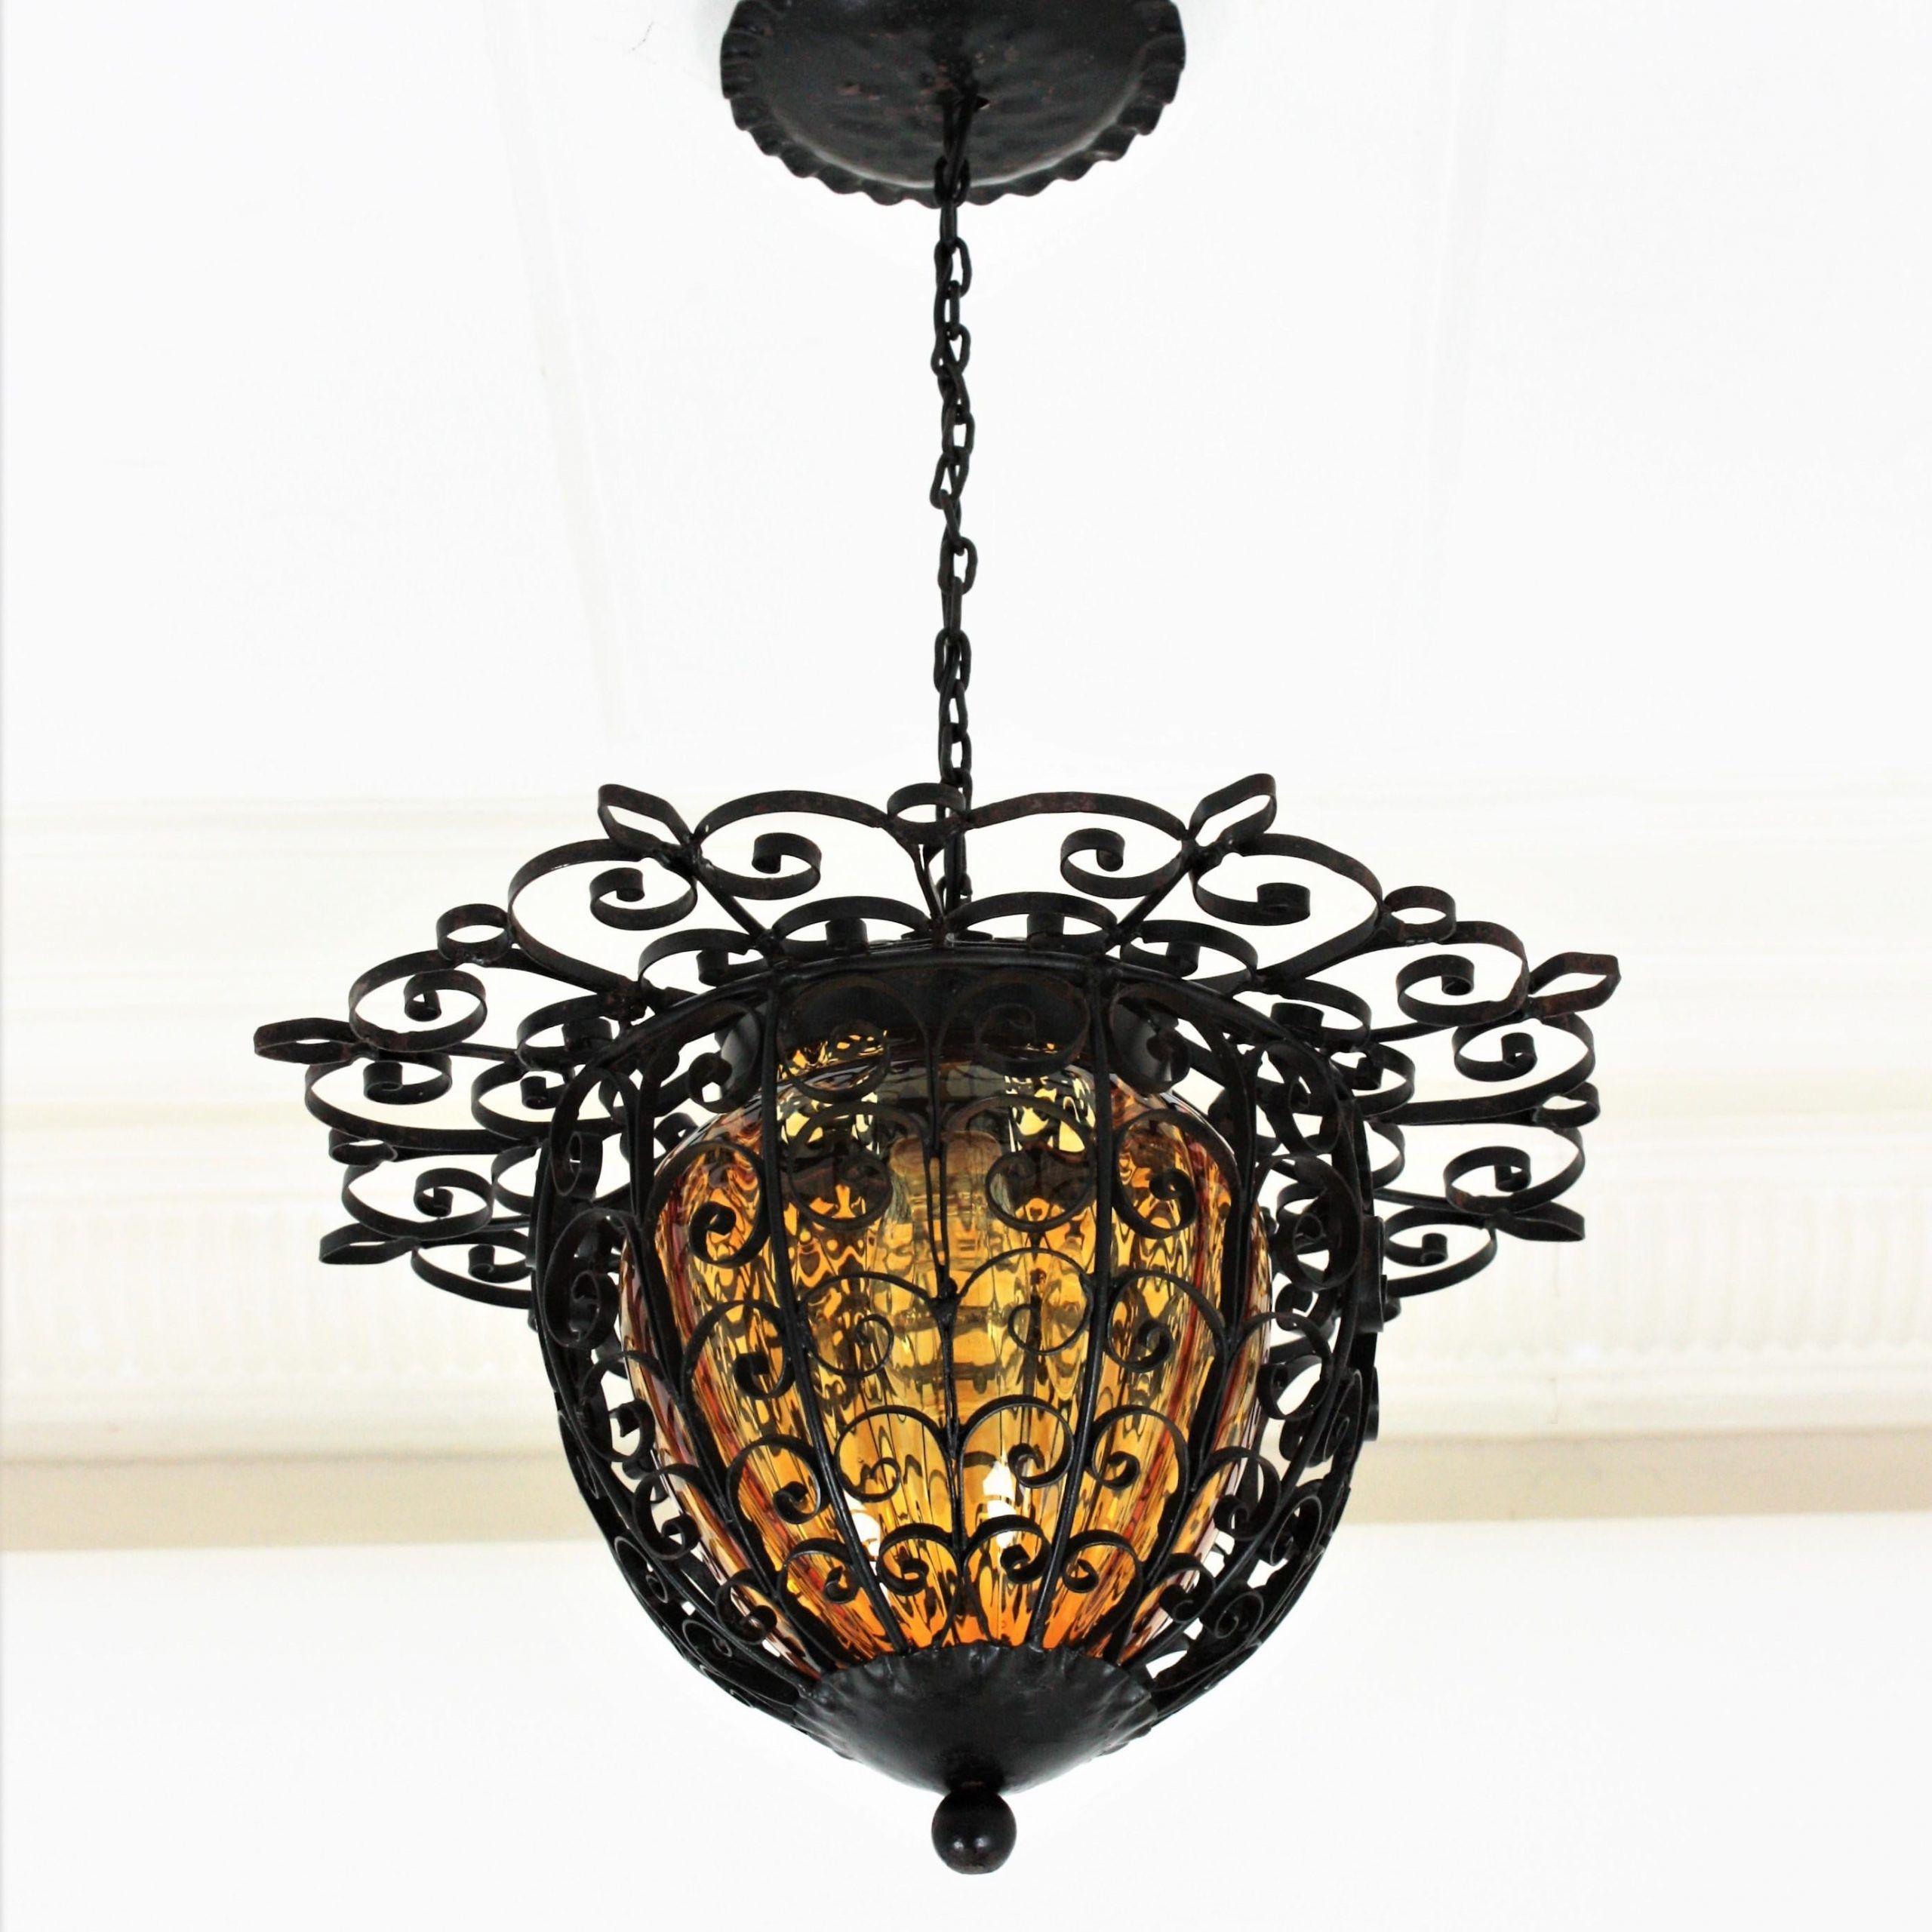 Blackened Iron Lantern Chandeliers For Fashionable Spanish Lantern Pendant Light In Wrought Iron With Amber Blown Glass Shade  For Sale At 1stdibs (View 8 of 15)